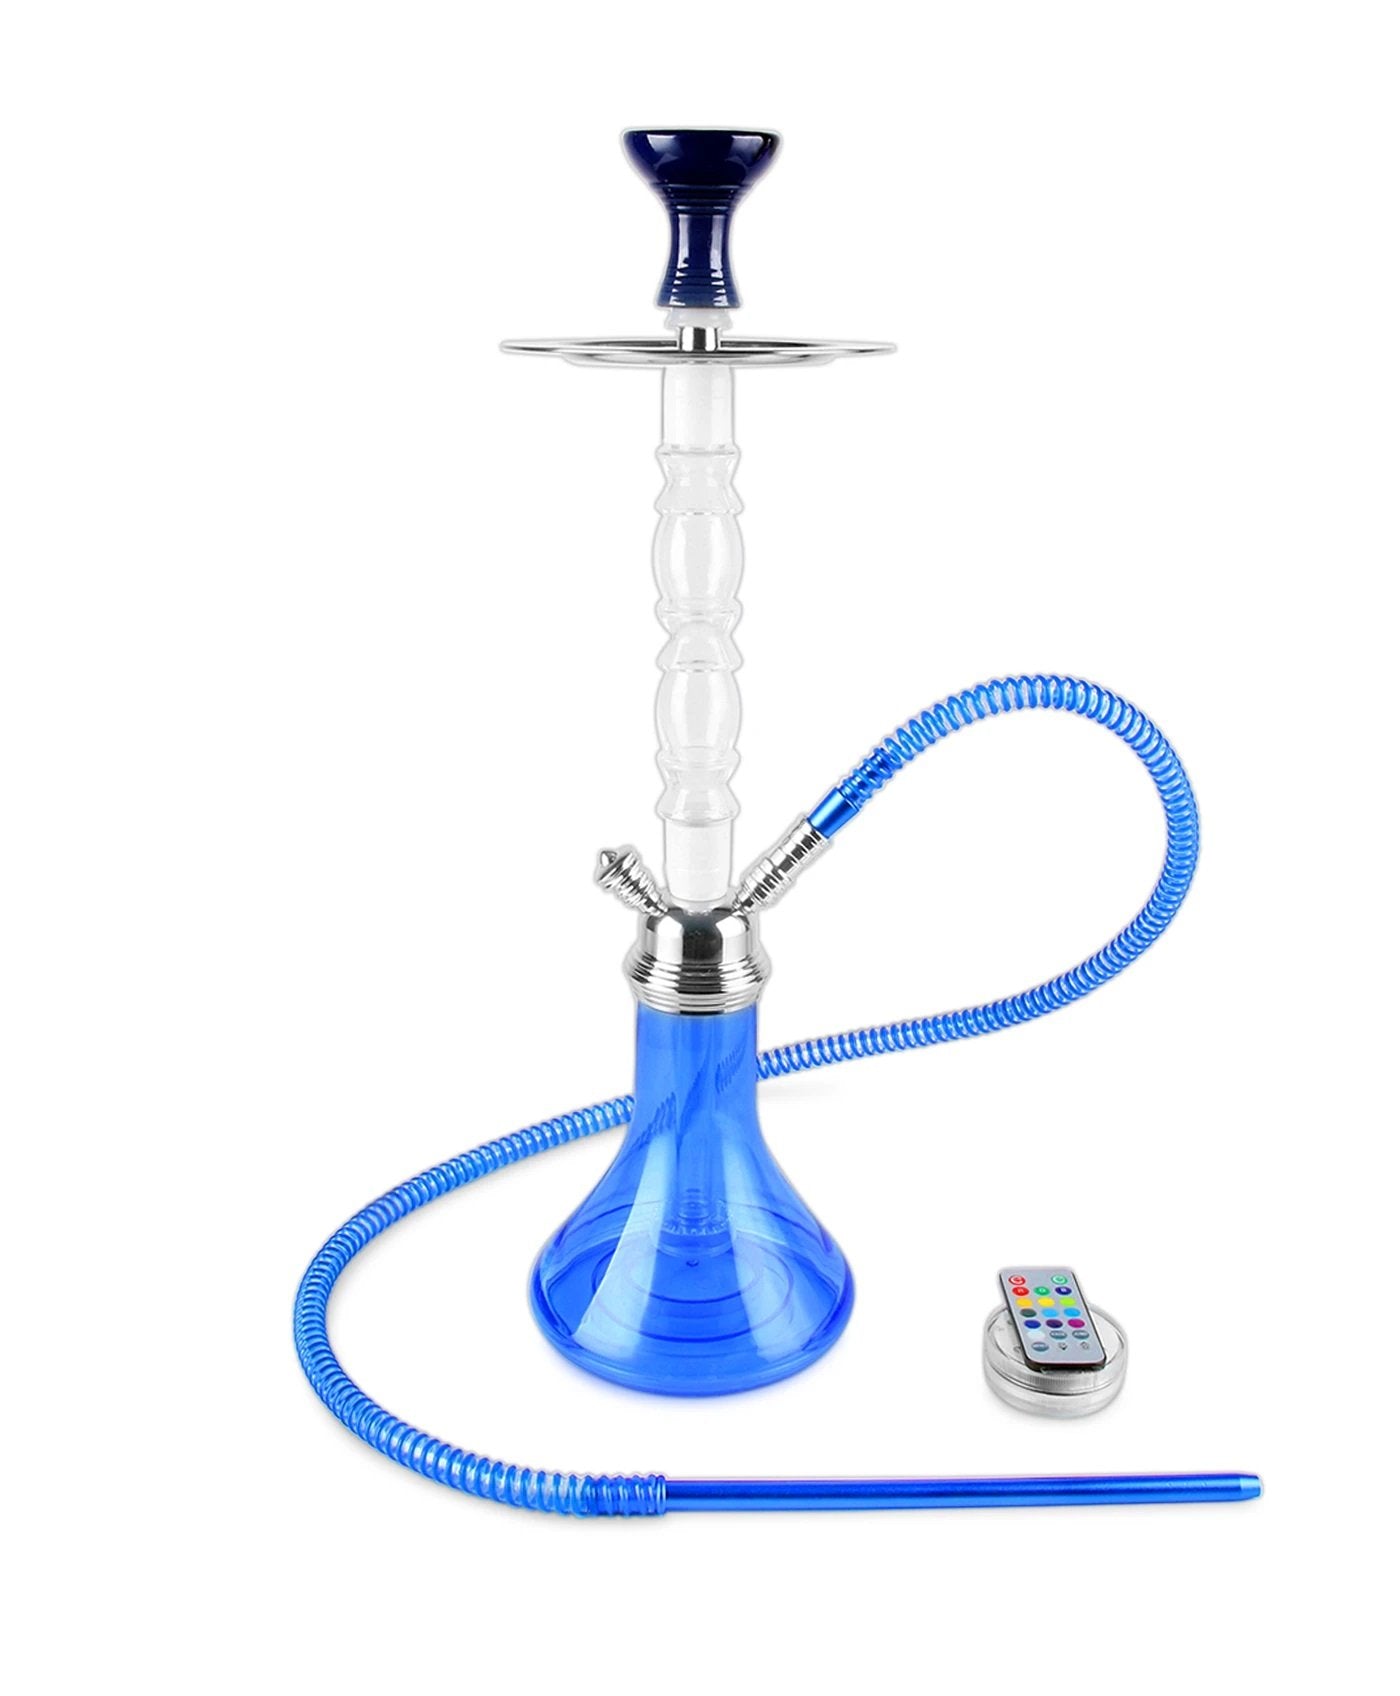 Rip Acdrylic Hookah 24" Clear Stem with blue base and led light controler